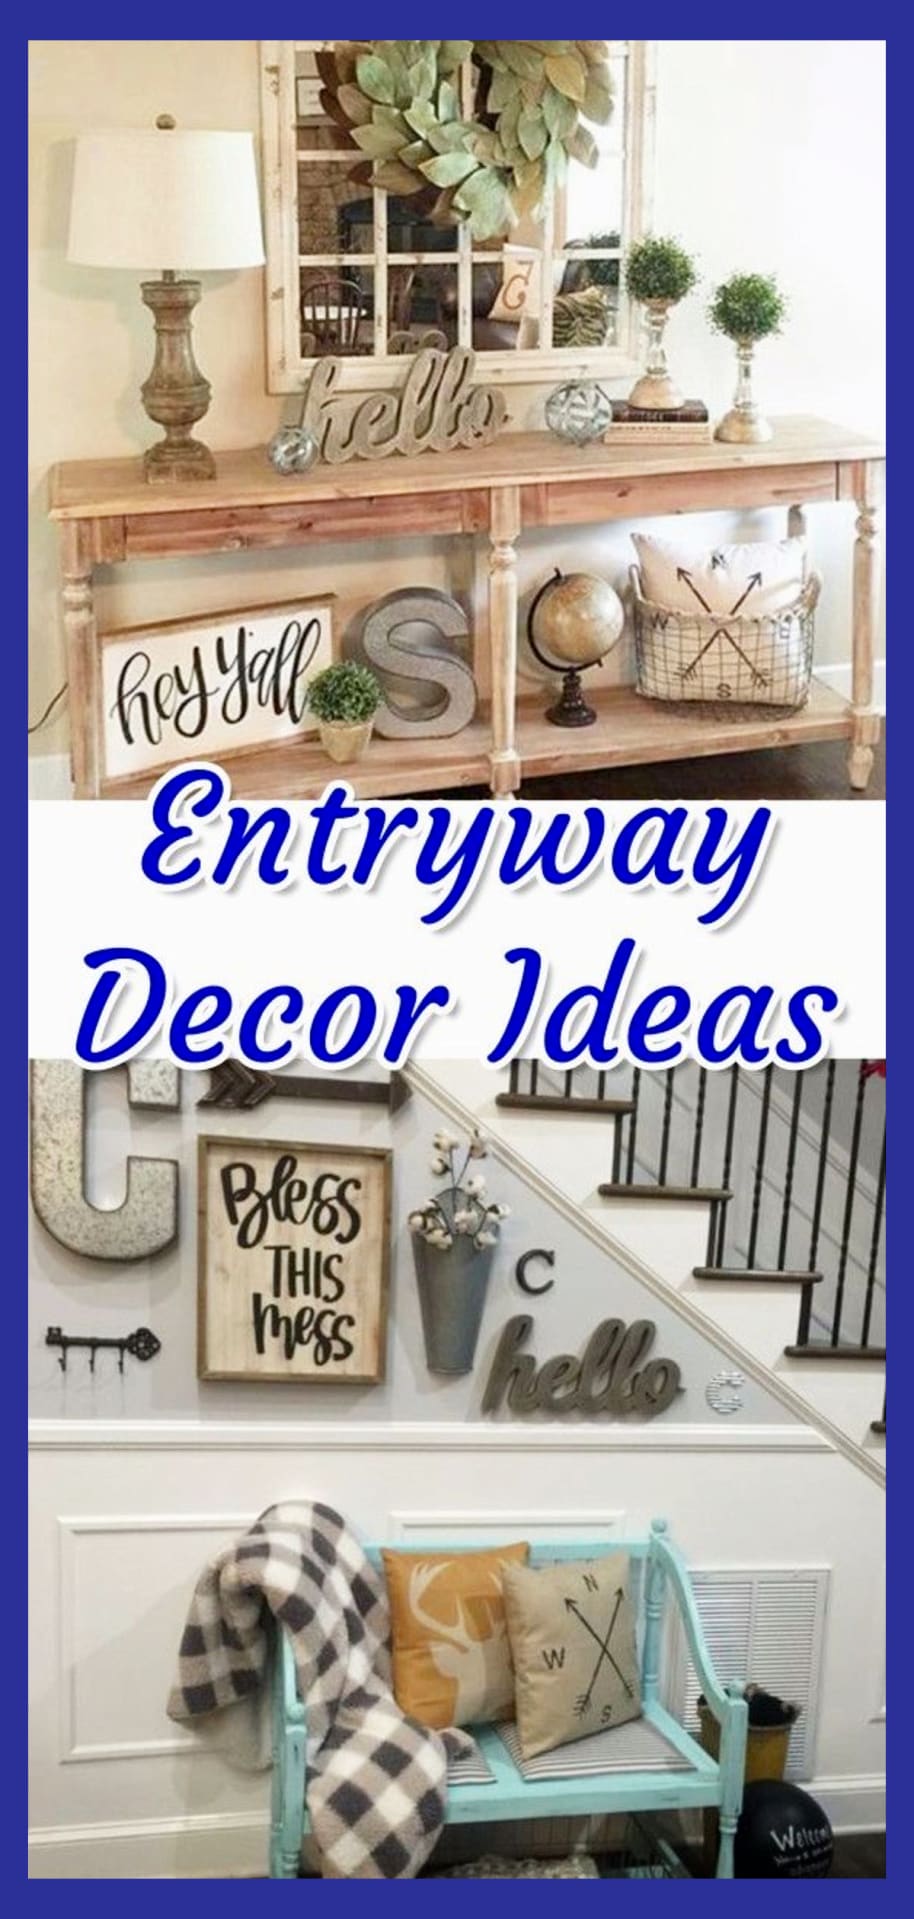 Foyer Decorating Ideas - Entryway decor ideas for a small foyer or apartment entryway.  Entryway benches, DIY entryway ideas, rustic, farmhouse entryway and foyer decorating pictures.